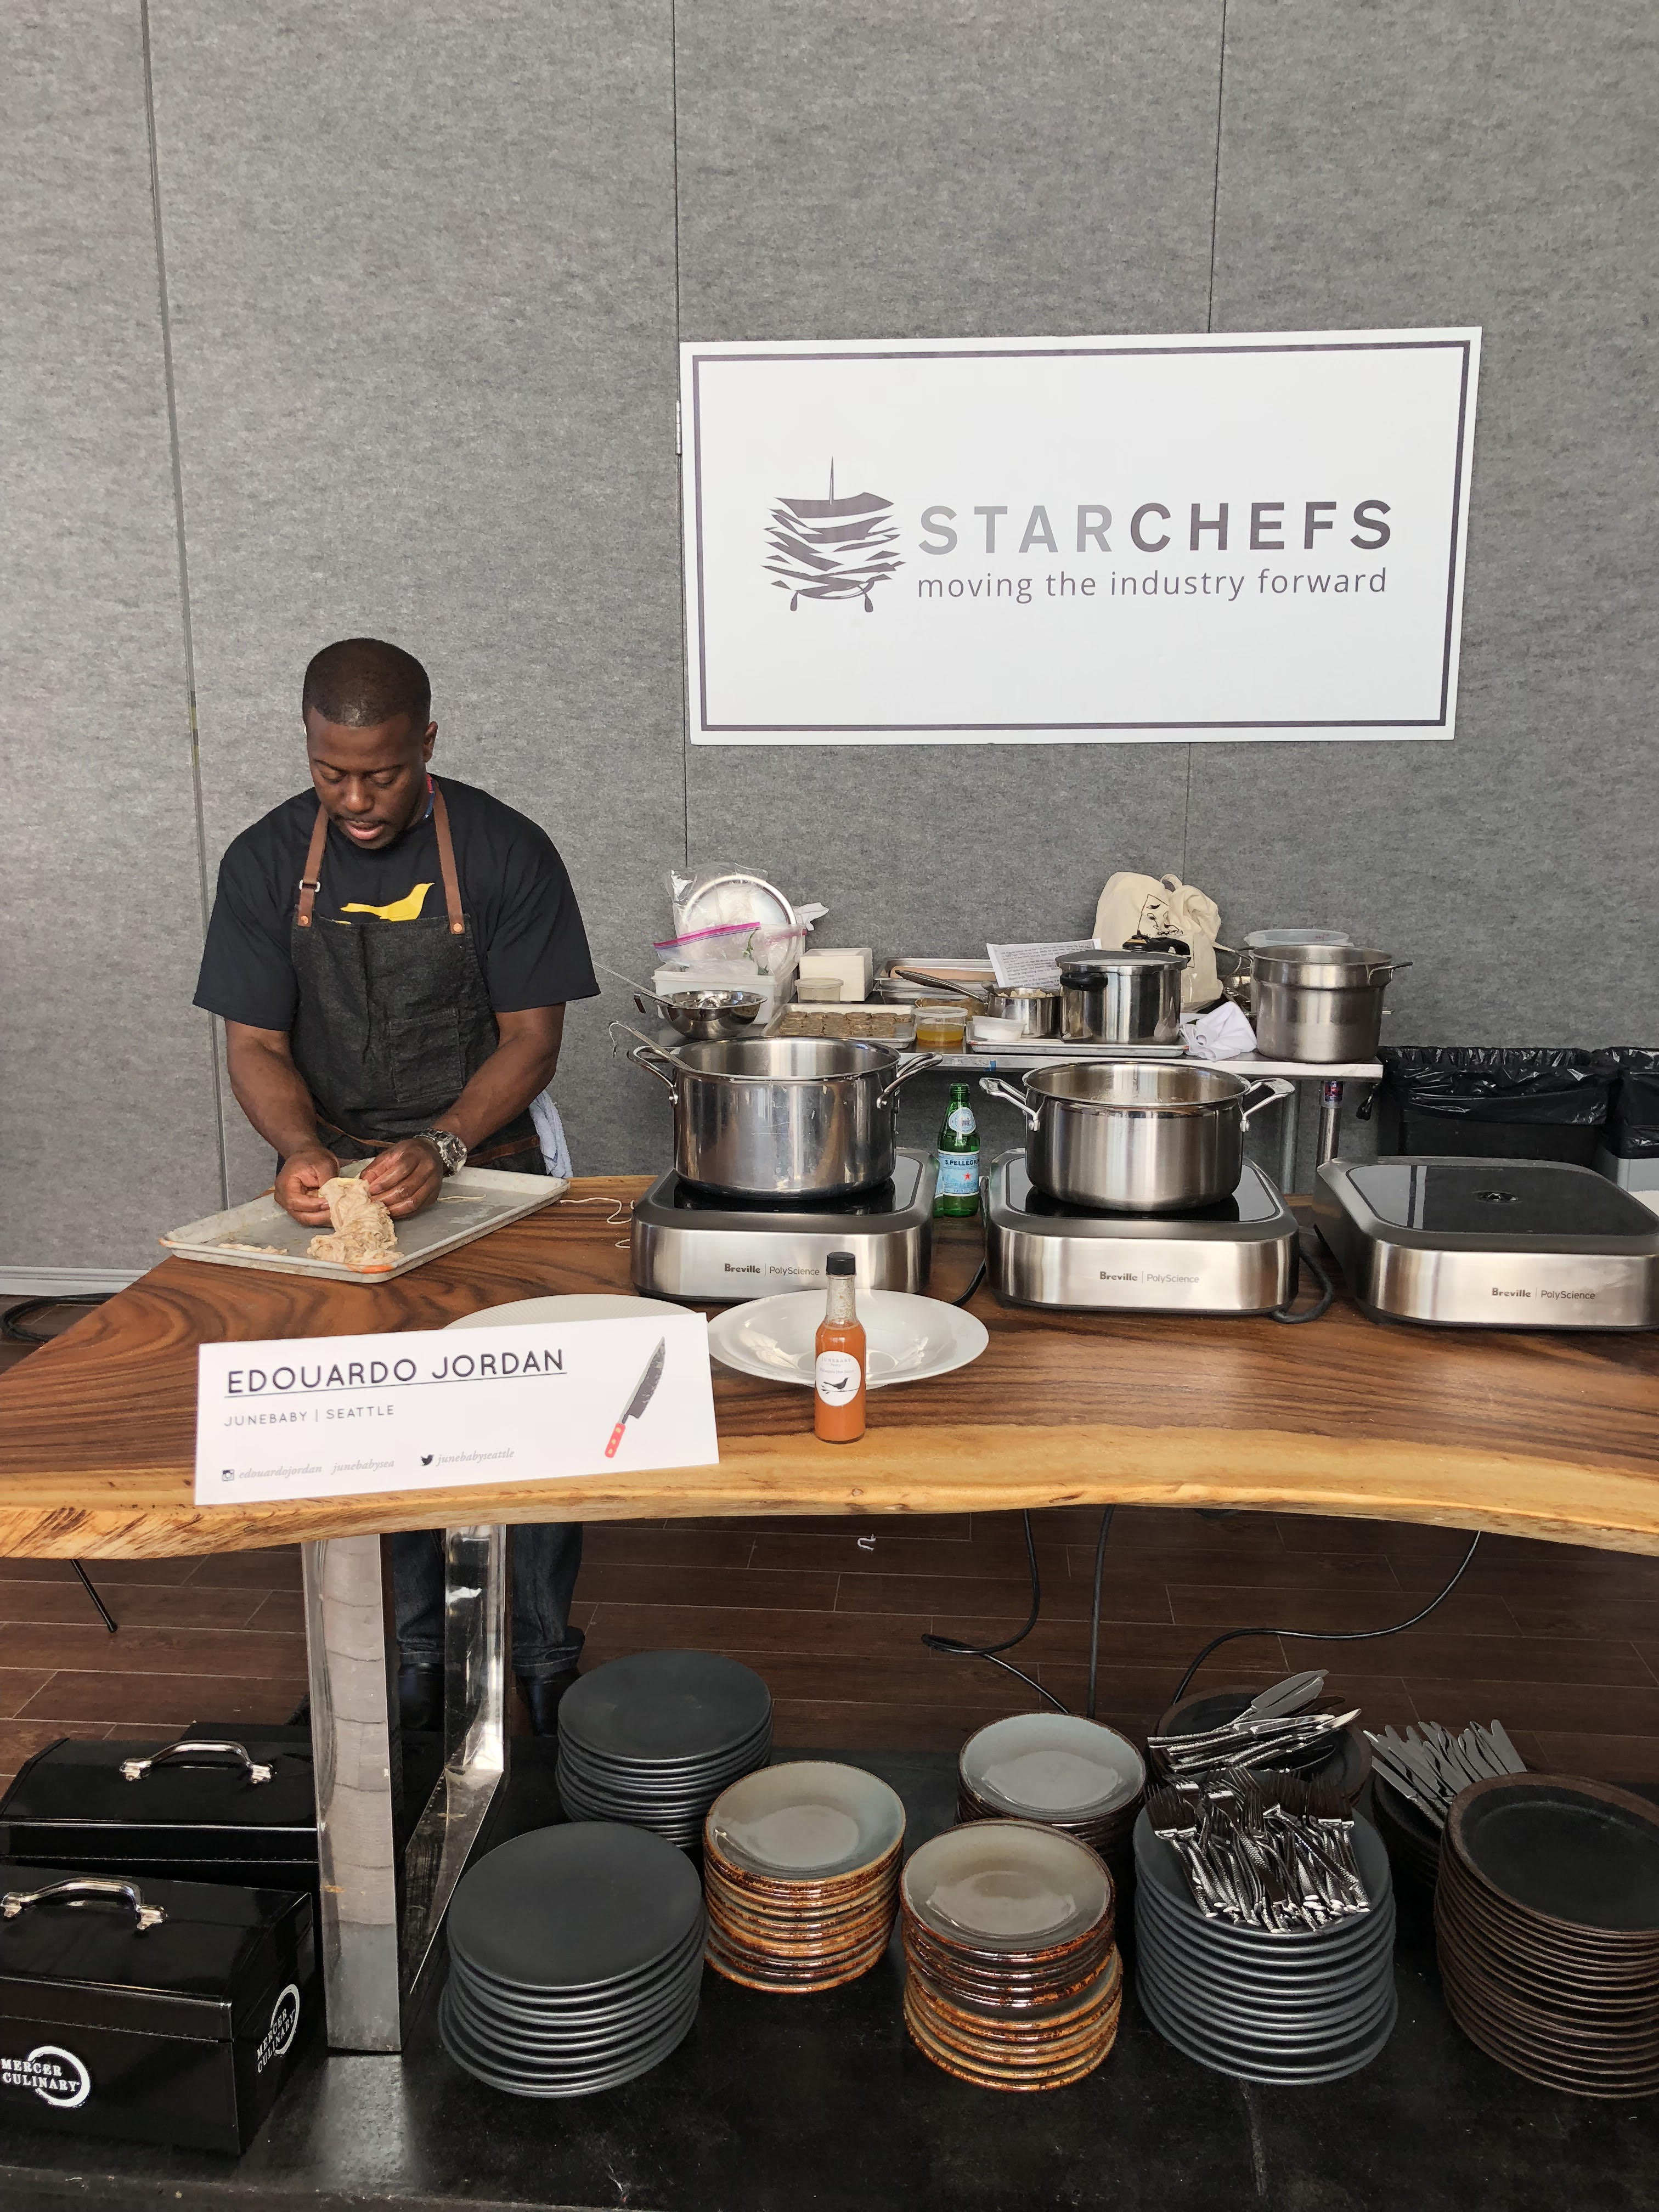 Seattle chef Edouardo Jordan making chitterlings and chitlins at the 2017 starchefs international chefs congress